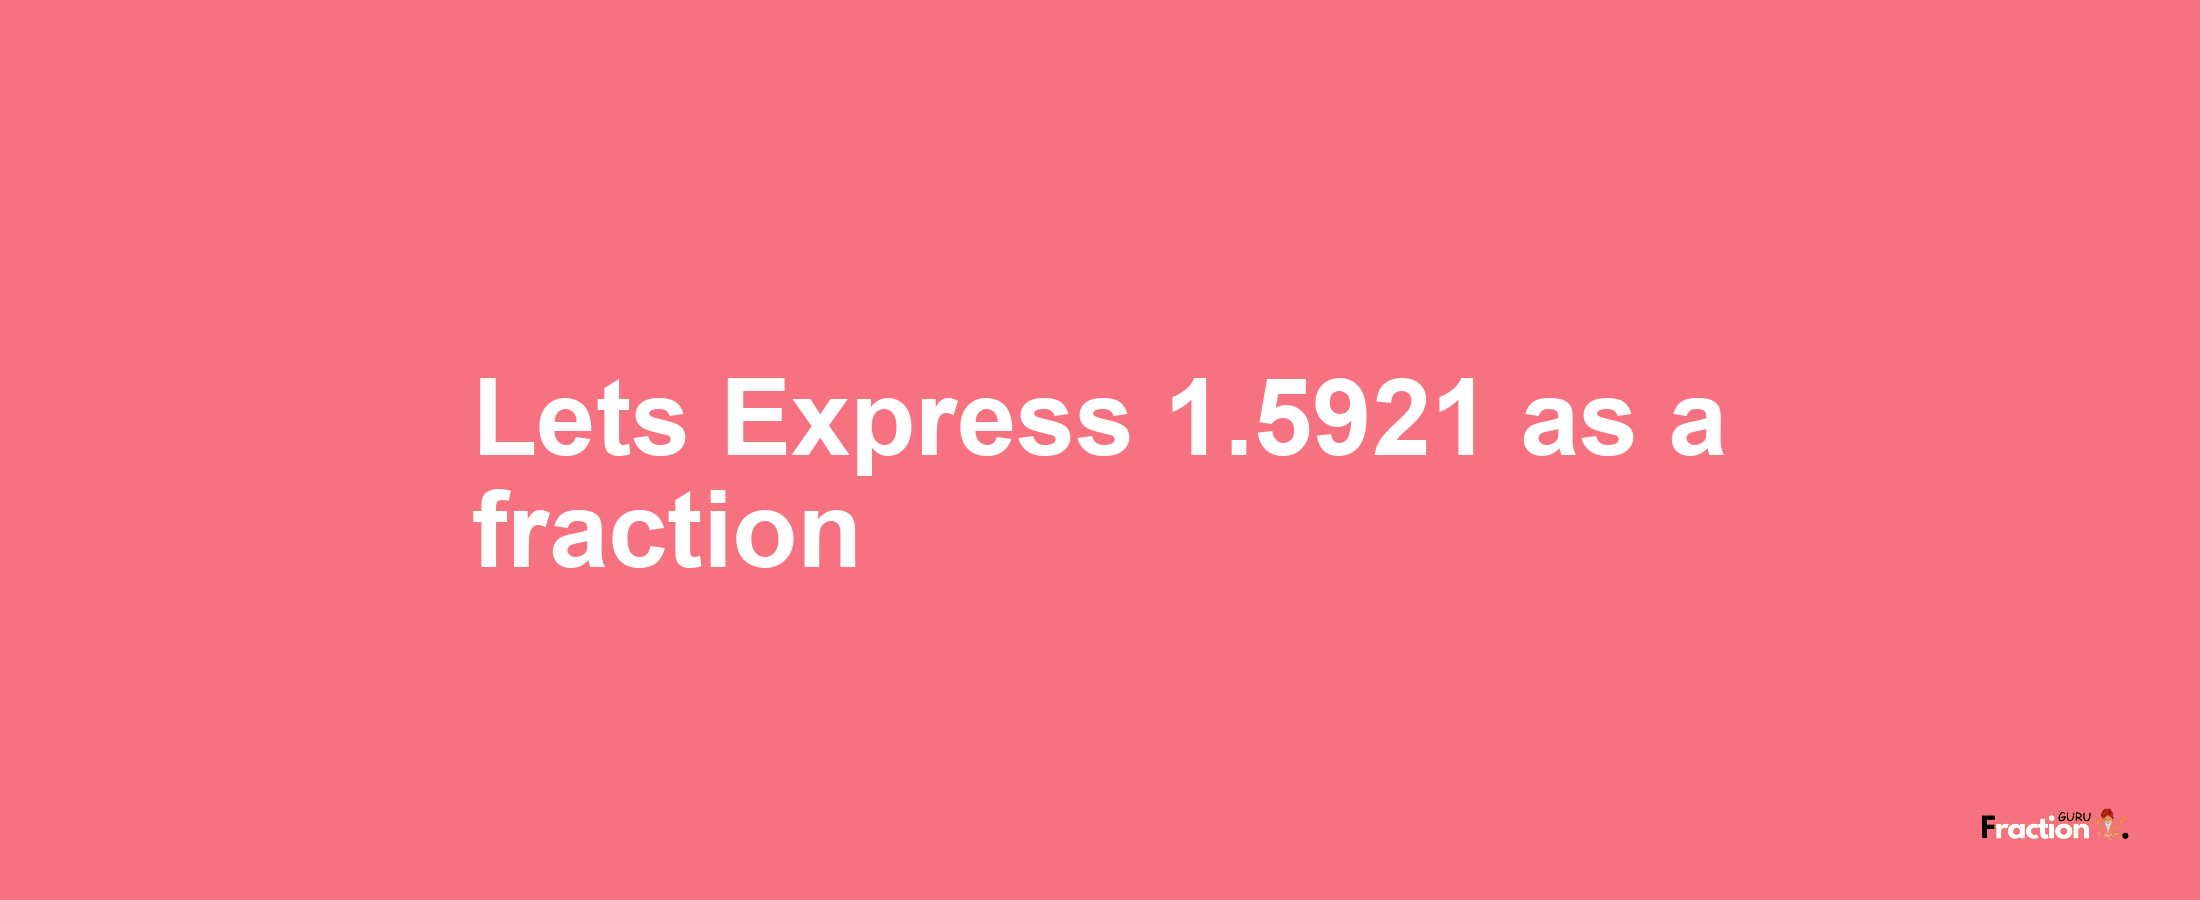 Lets Express 1.5921 as afraction